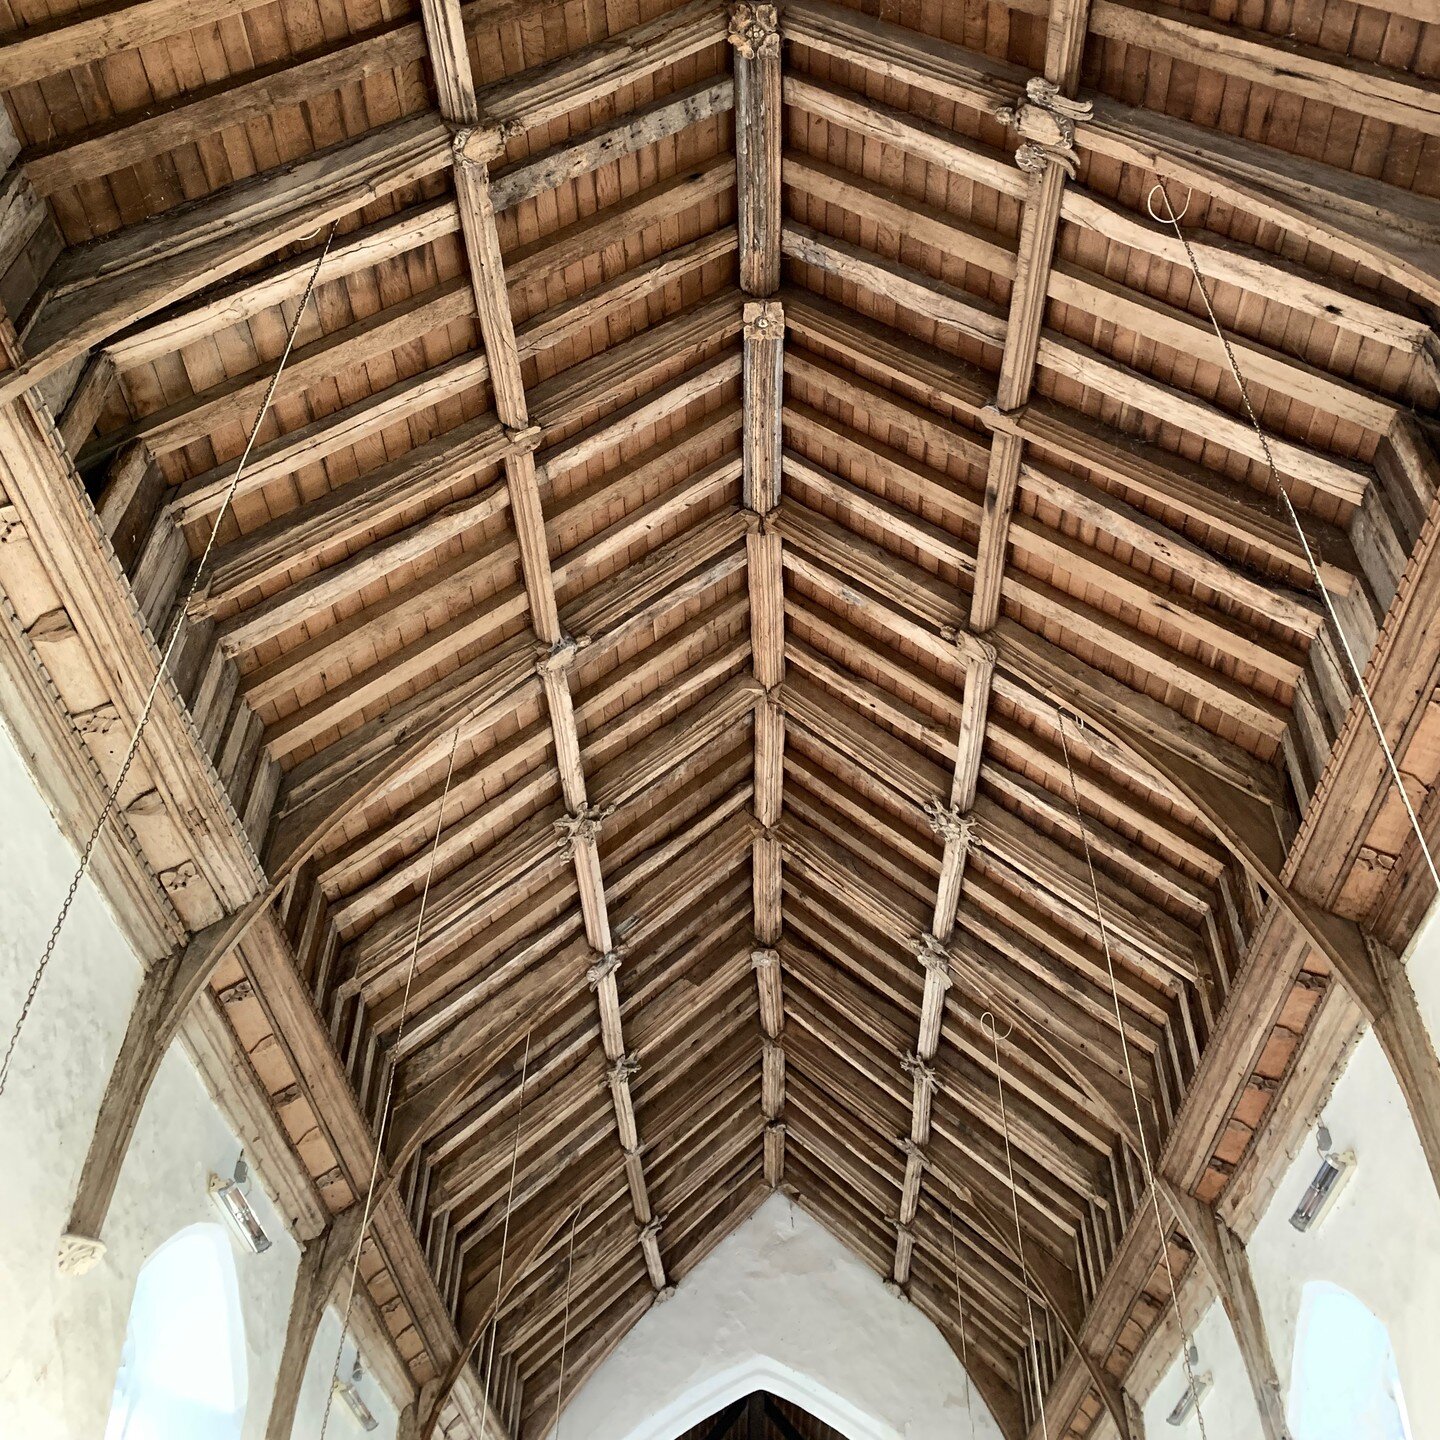 And another - here is the amazing oak roof and porch of Barney church which we just limewashed. 
Limewash - Hendry &amp; Son Foulsham
Remedial lime mortars and plasters - @mike_wye 
Limewashing and by our Bayfield Painters.
.
.
.
.
.
.
.
#limewash #b